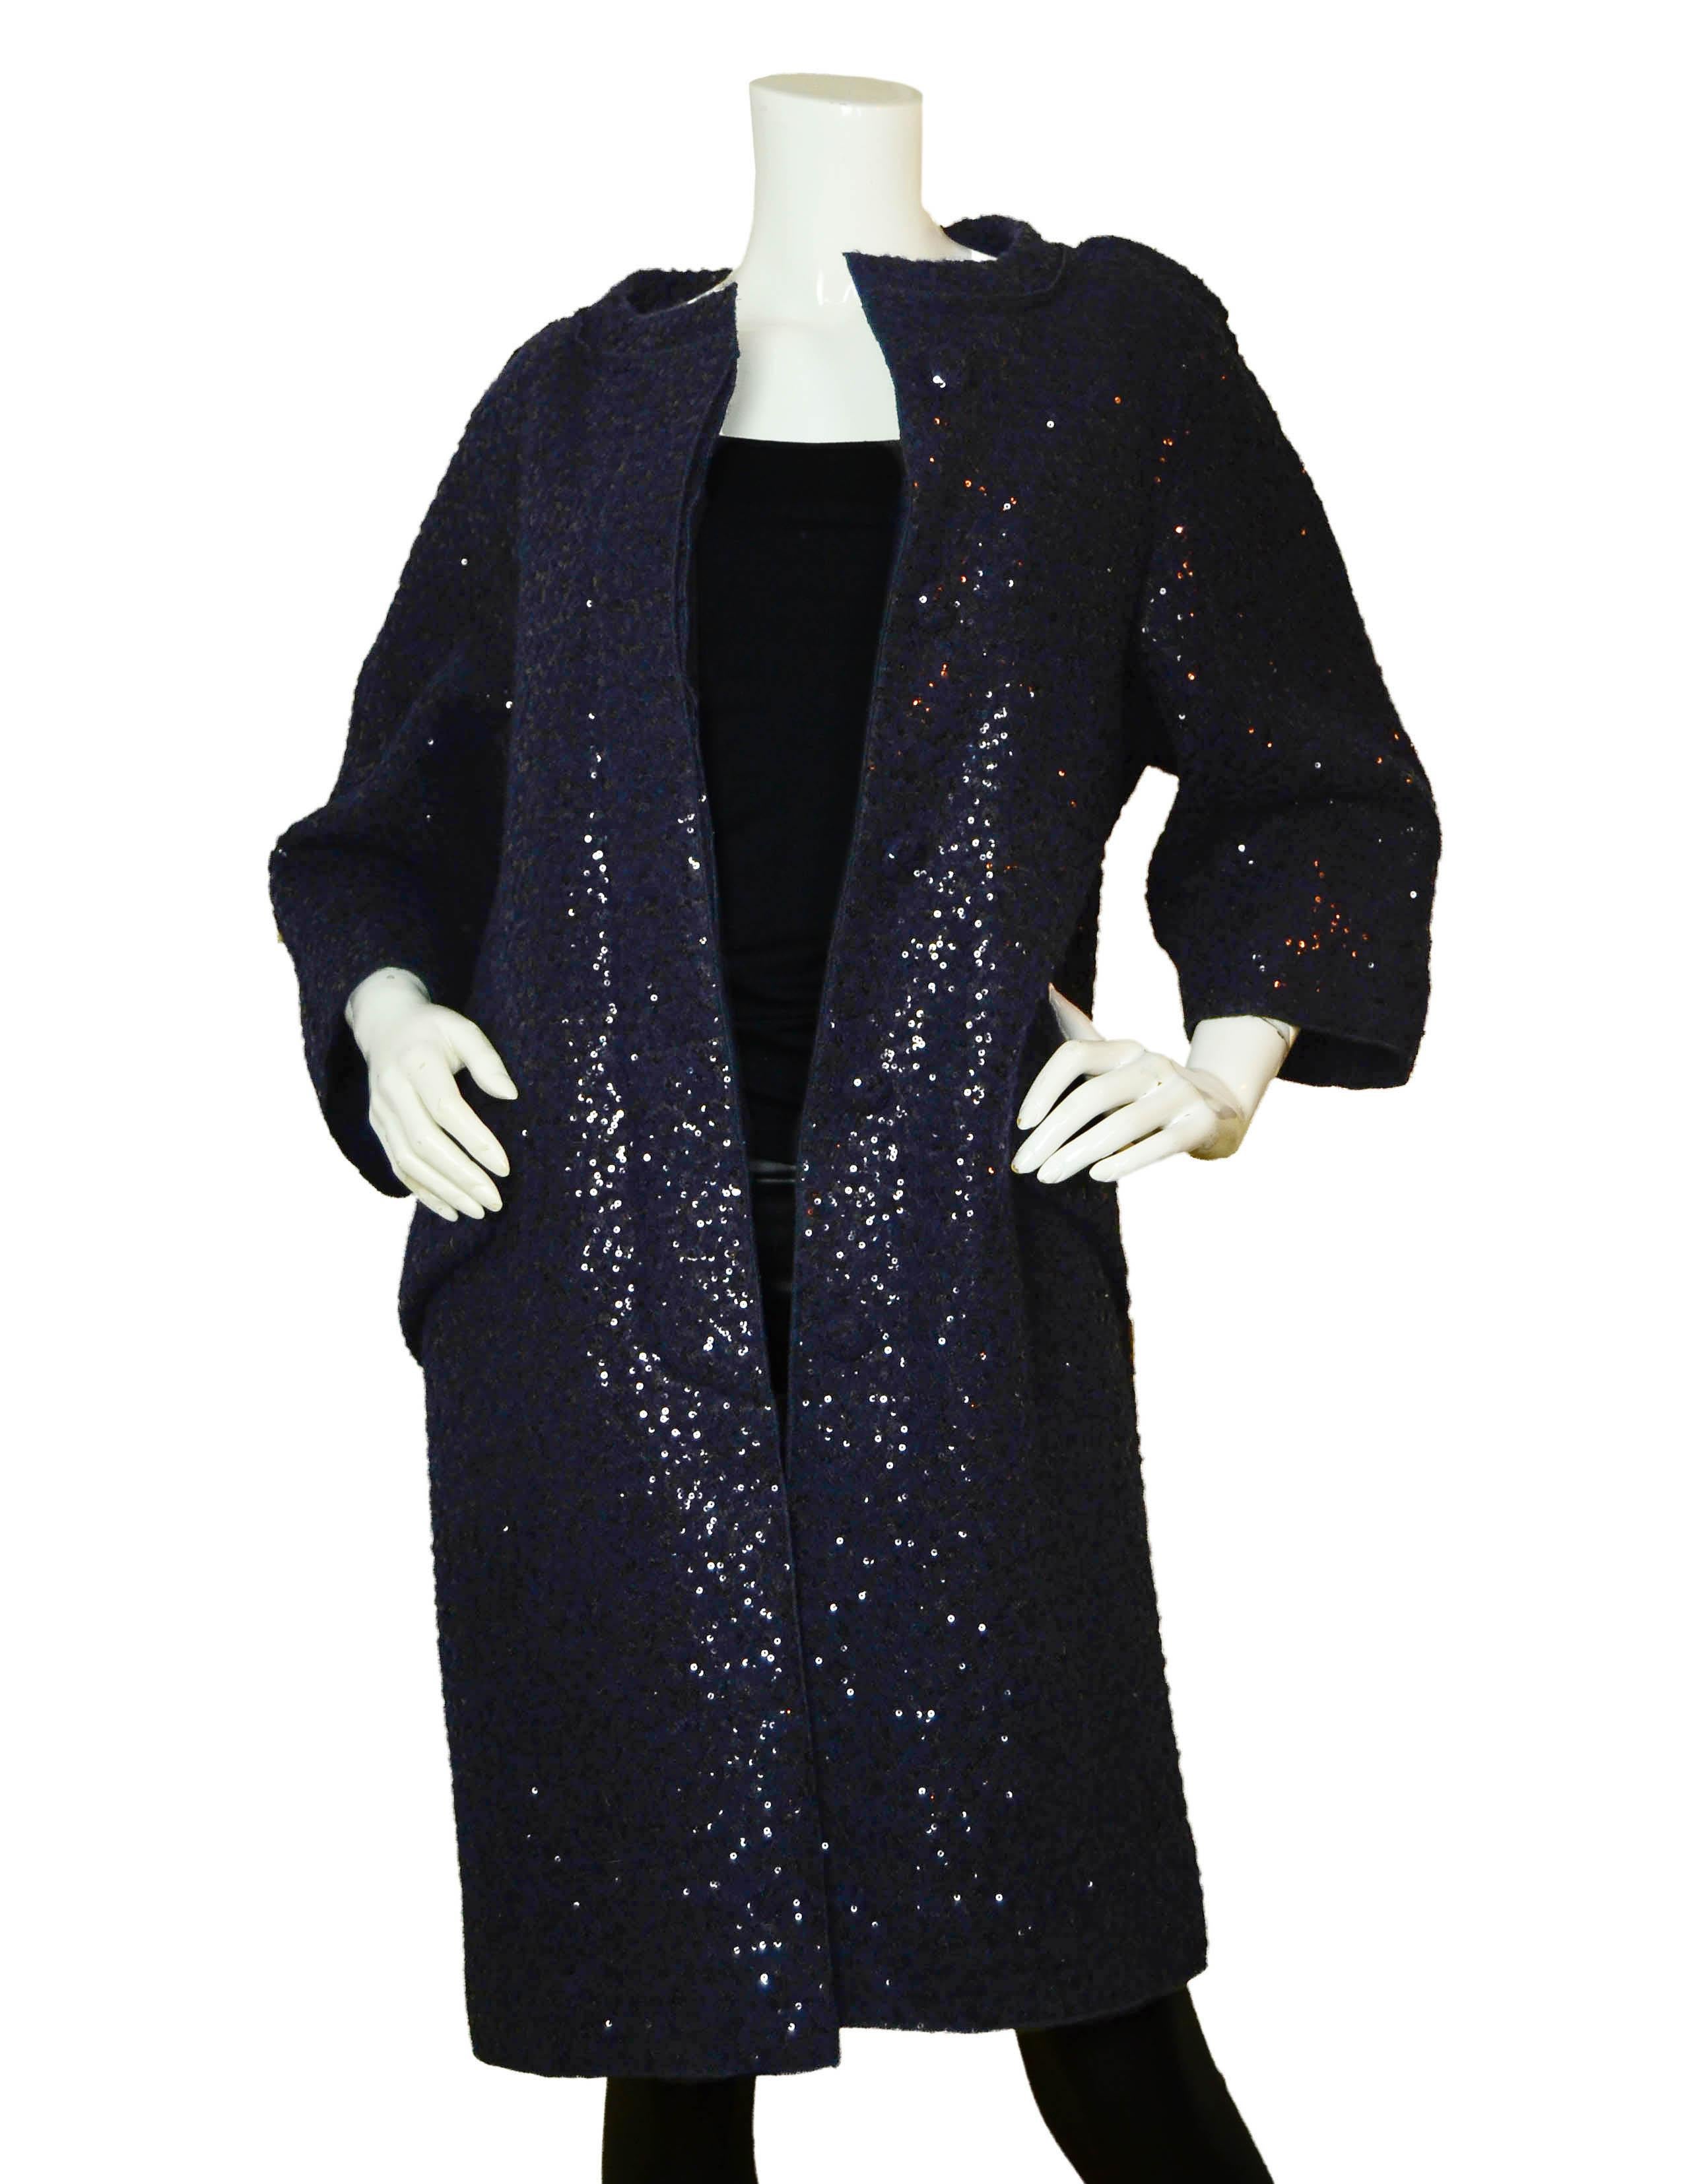 Nina Ricci Navy Sequined Boucle Coat

Made In: France
Color: Navy
Materials: 60% Wool, 40% Polyester
Opening/Closure: Button down
Overall Condition: Excellent

Tag Size: FR36/ US 2-4  *Please refer to measurements to ensure fit
Shoulder To Shoulder: